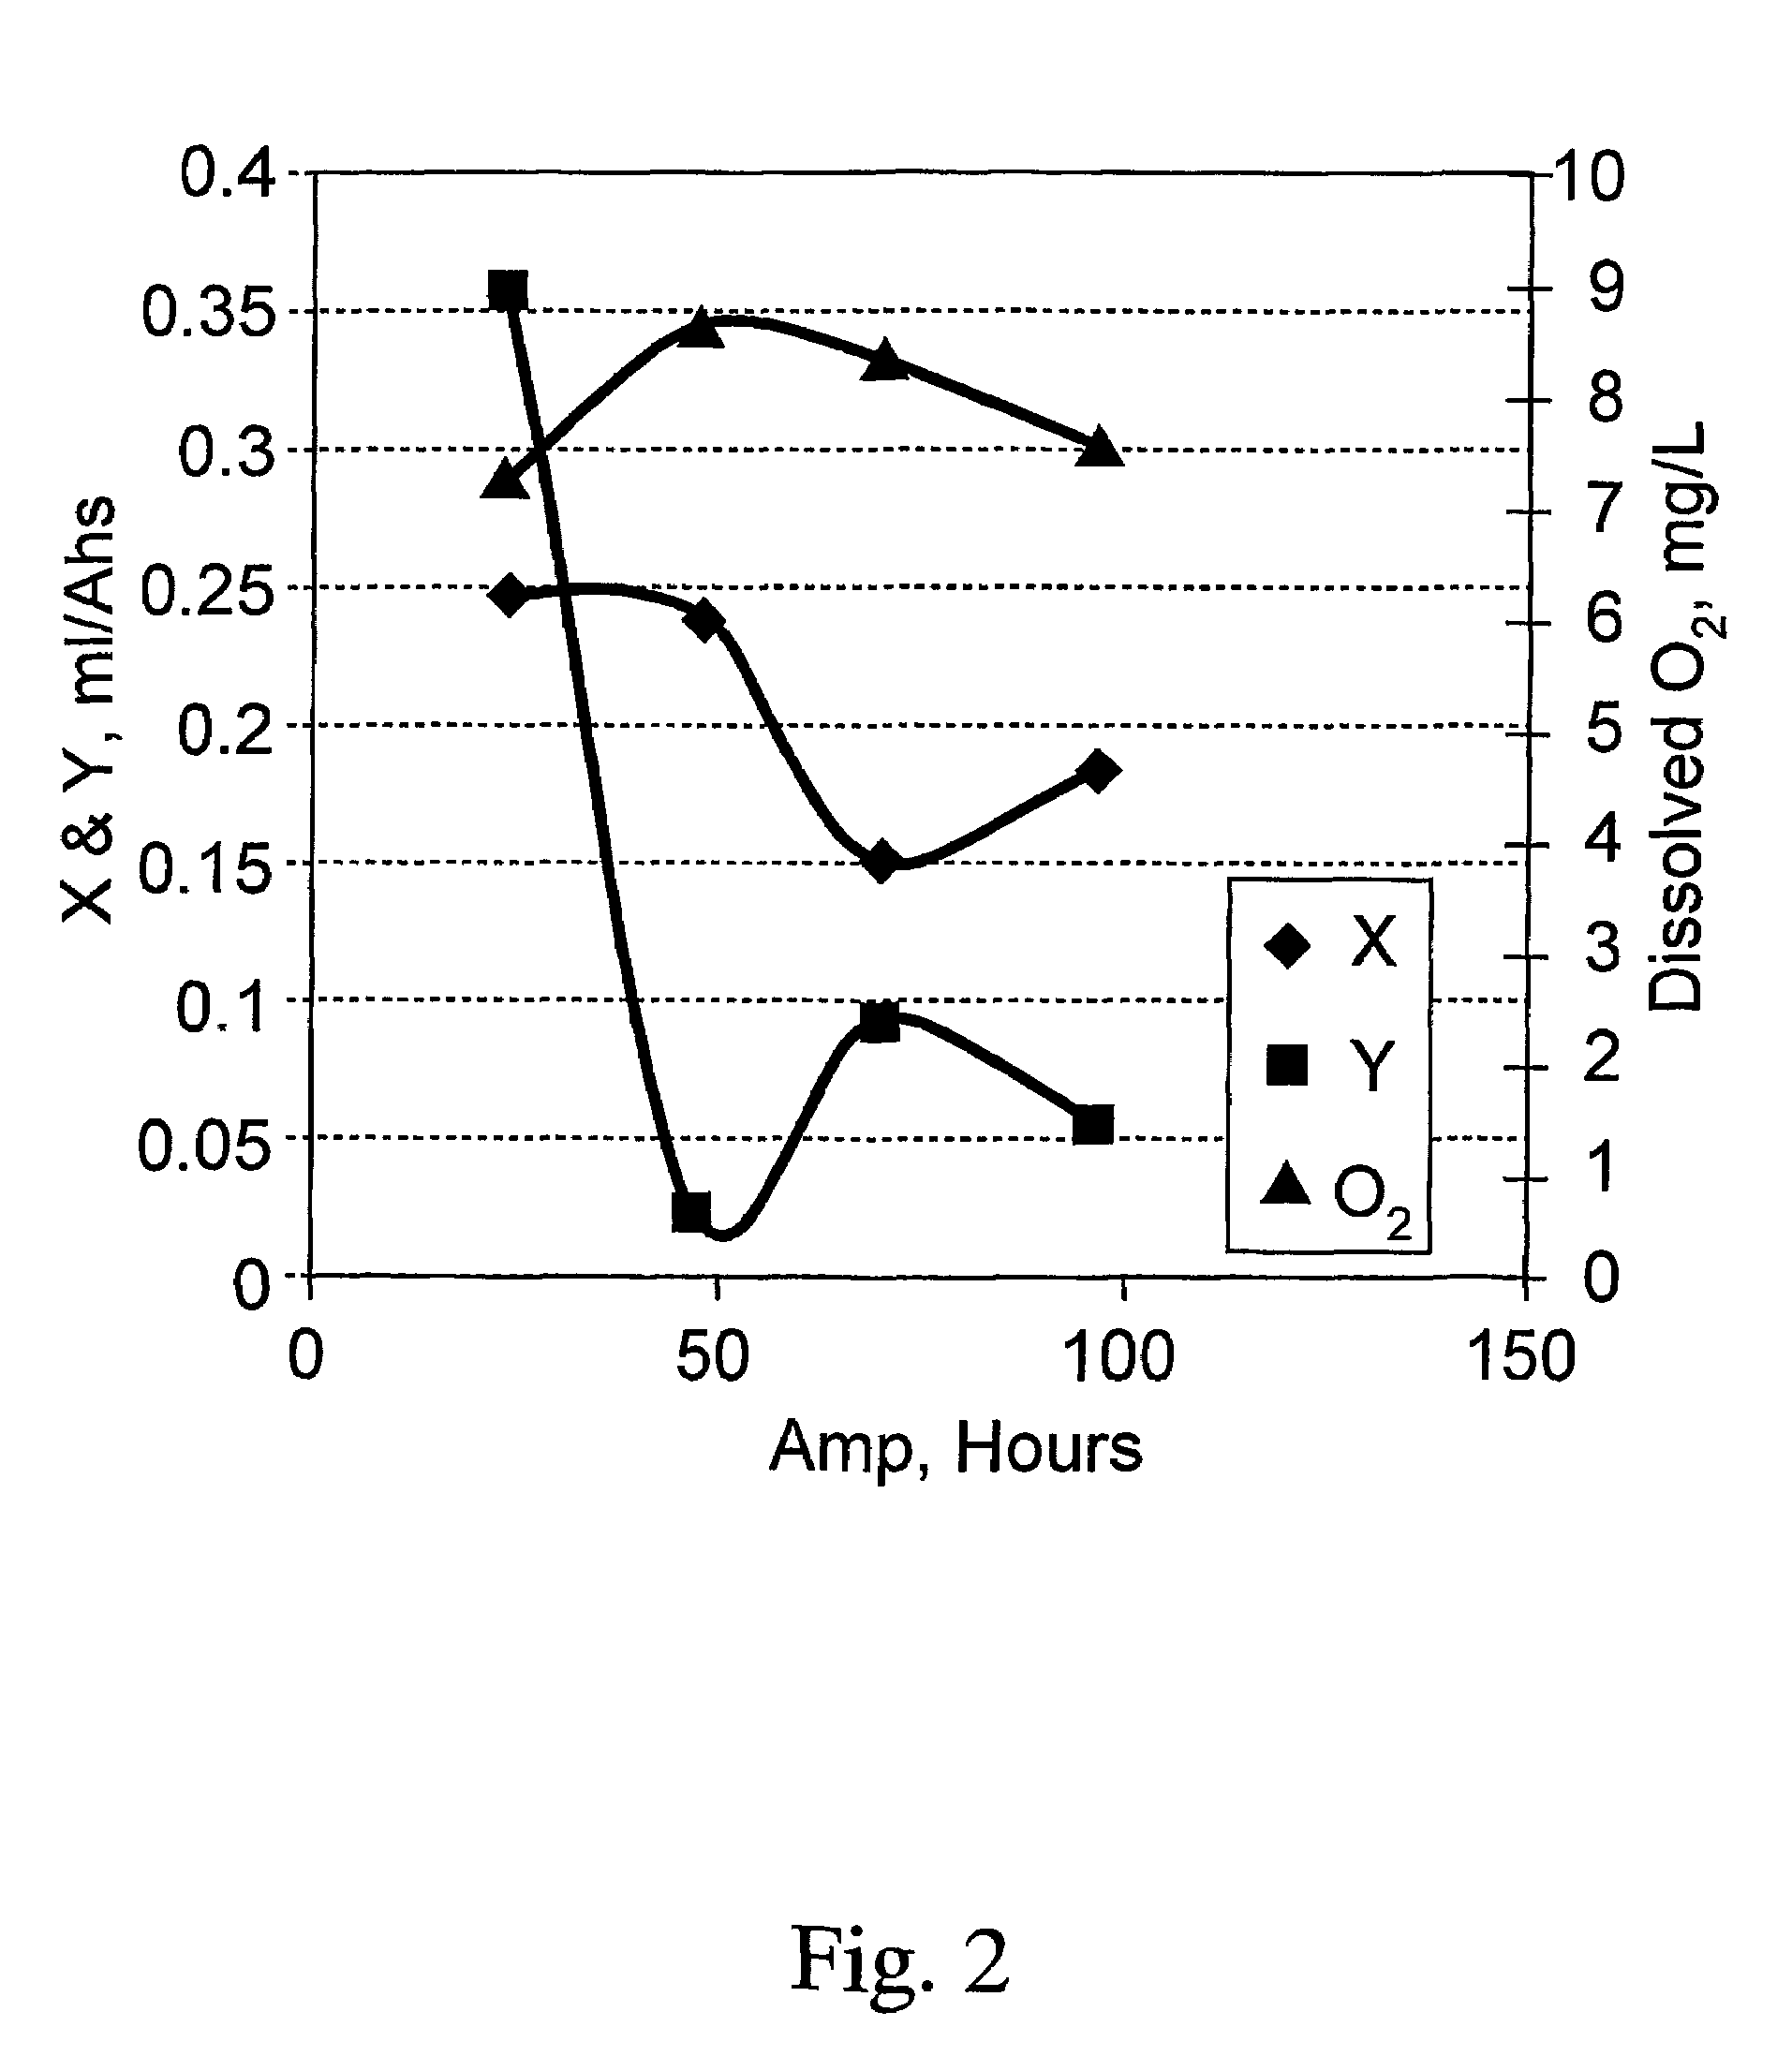 Process for degassing an aqueous plating solution